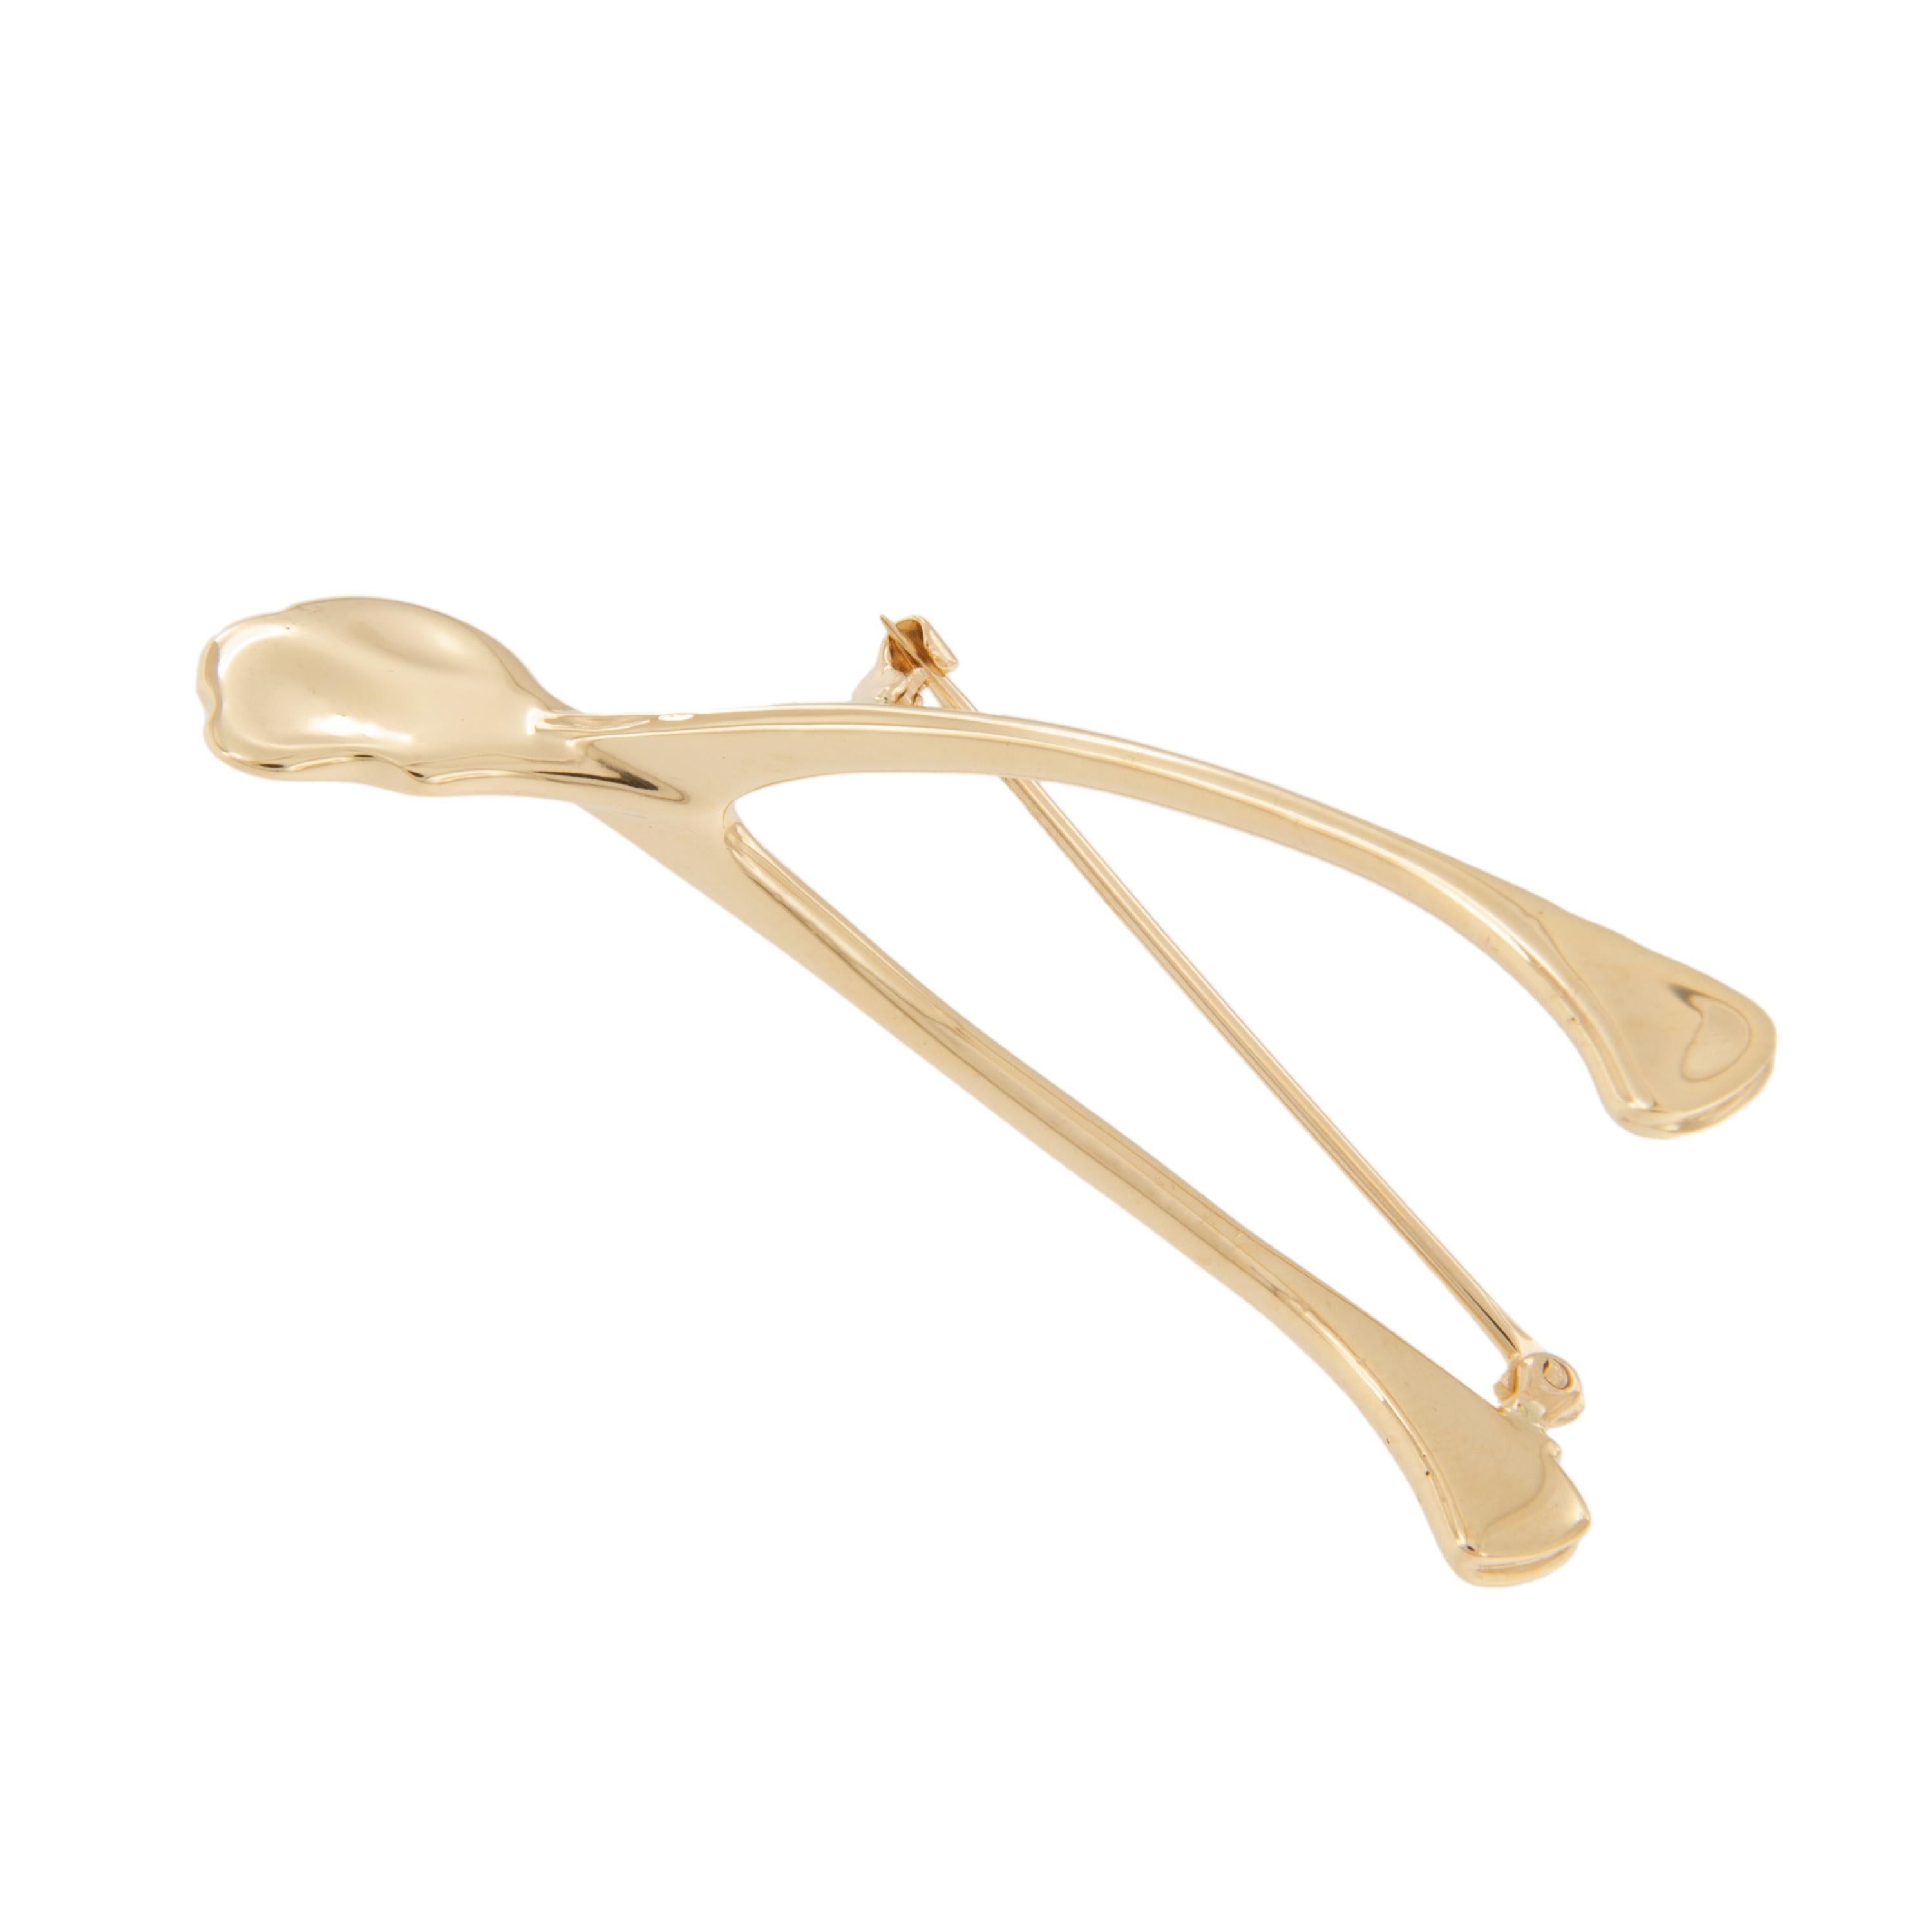 People will be fighting over this wishbone brooch! You could be the lucky owner and wear the legendary bearer of wishes and dreams everyday. Crafted in fine 14 karat yellow gold with expert detail and secure pin with clasp. 2 1/8